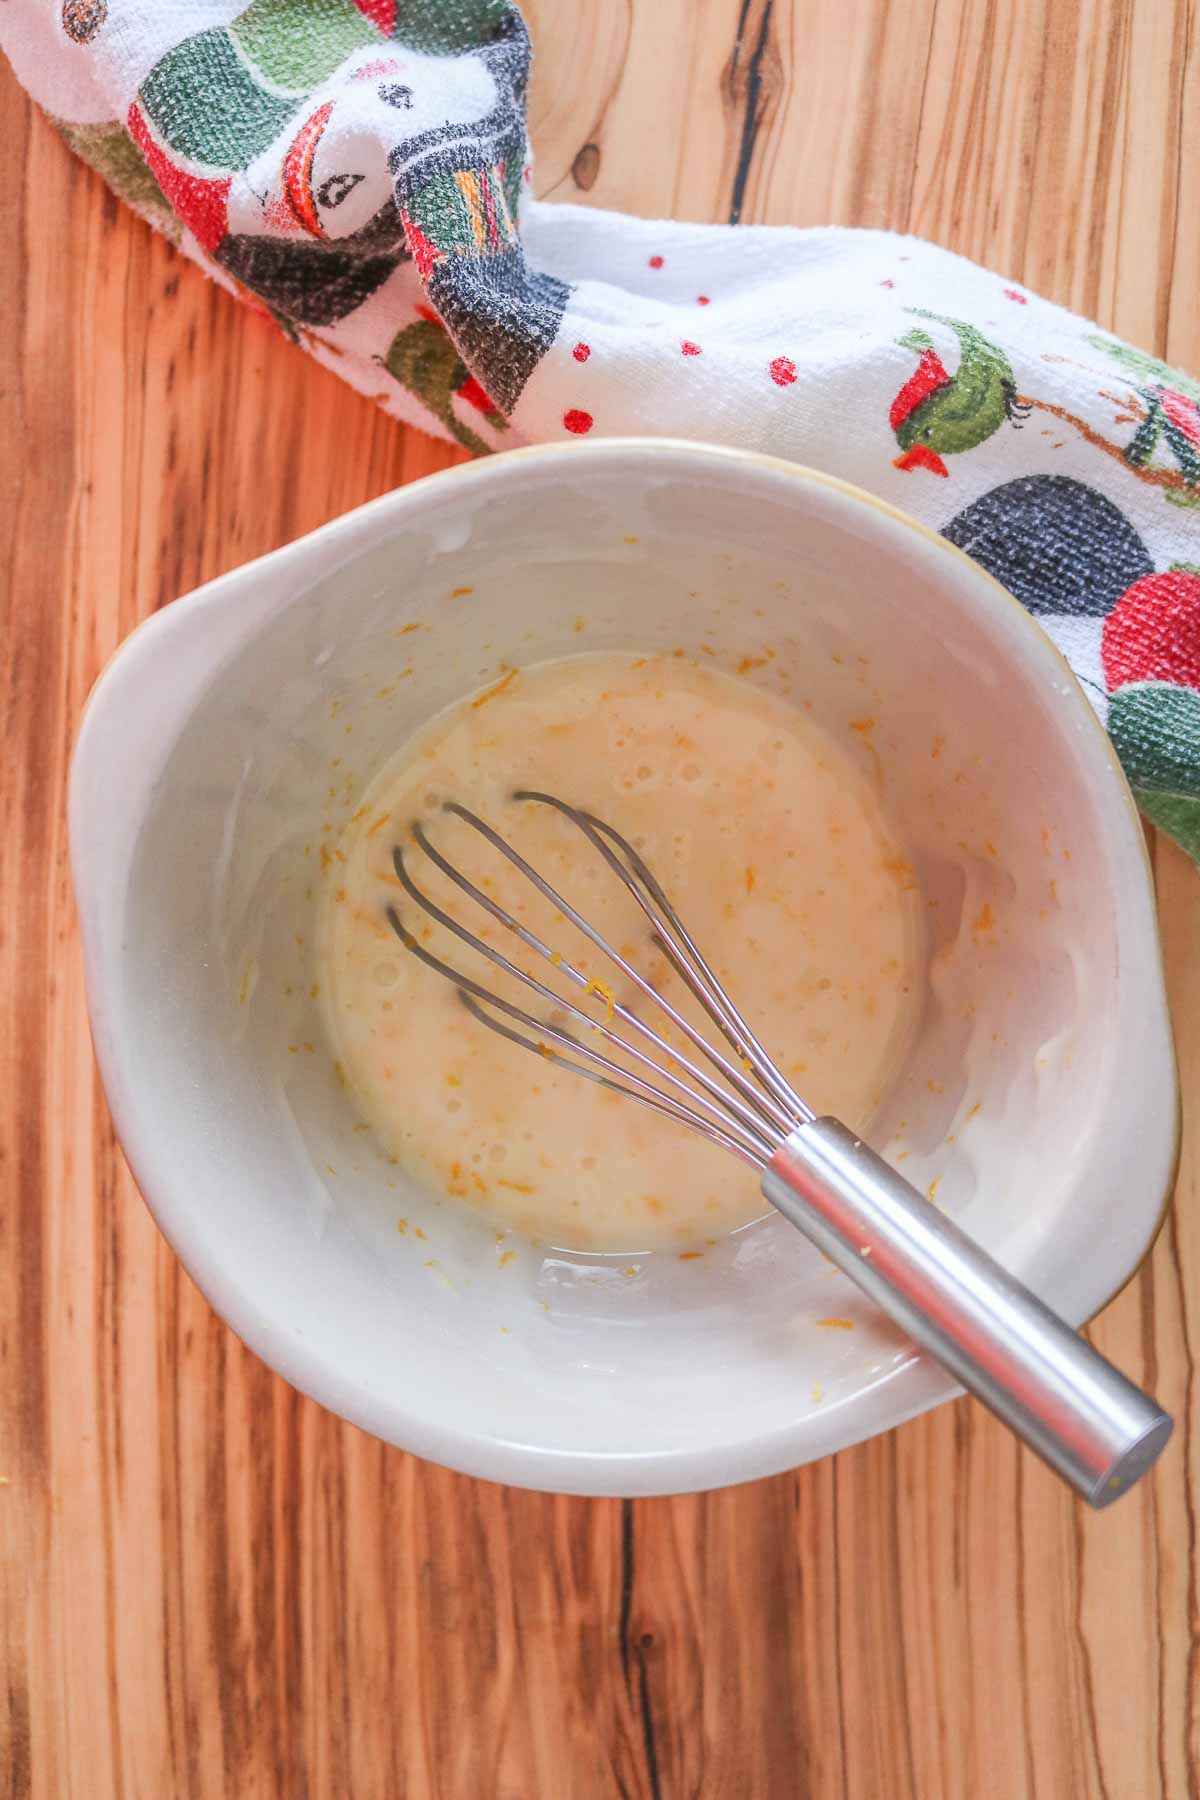 Orange icing sugar glaze in a bowl with a whisk resting in the bowl.